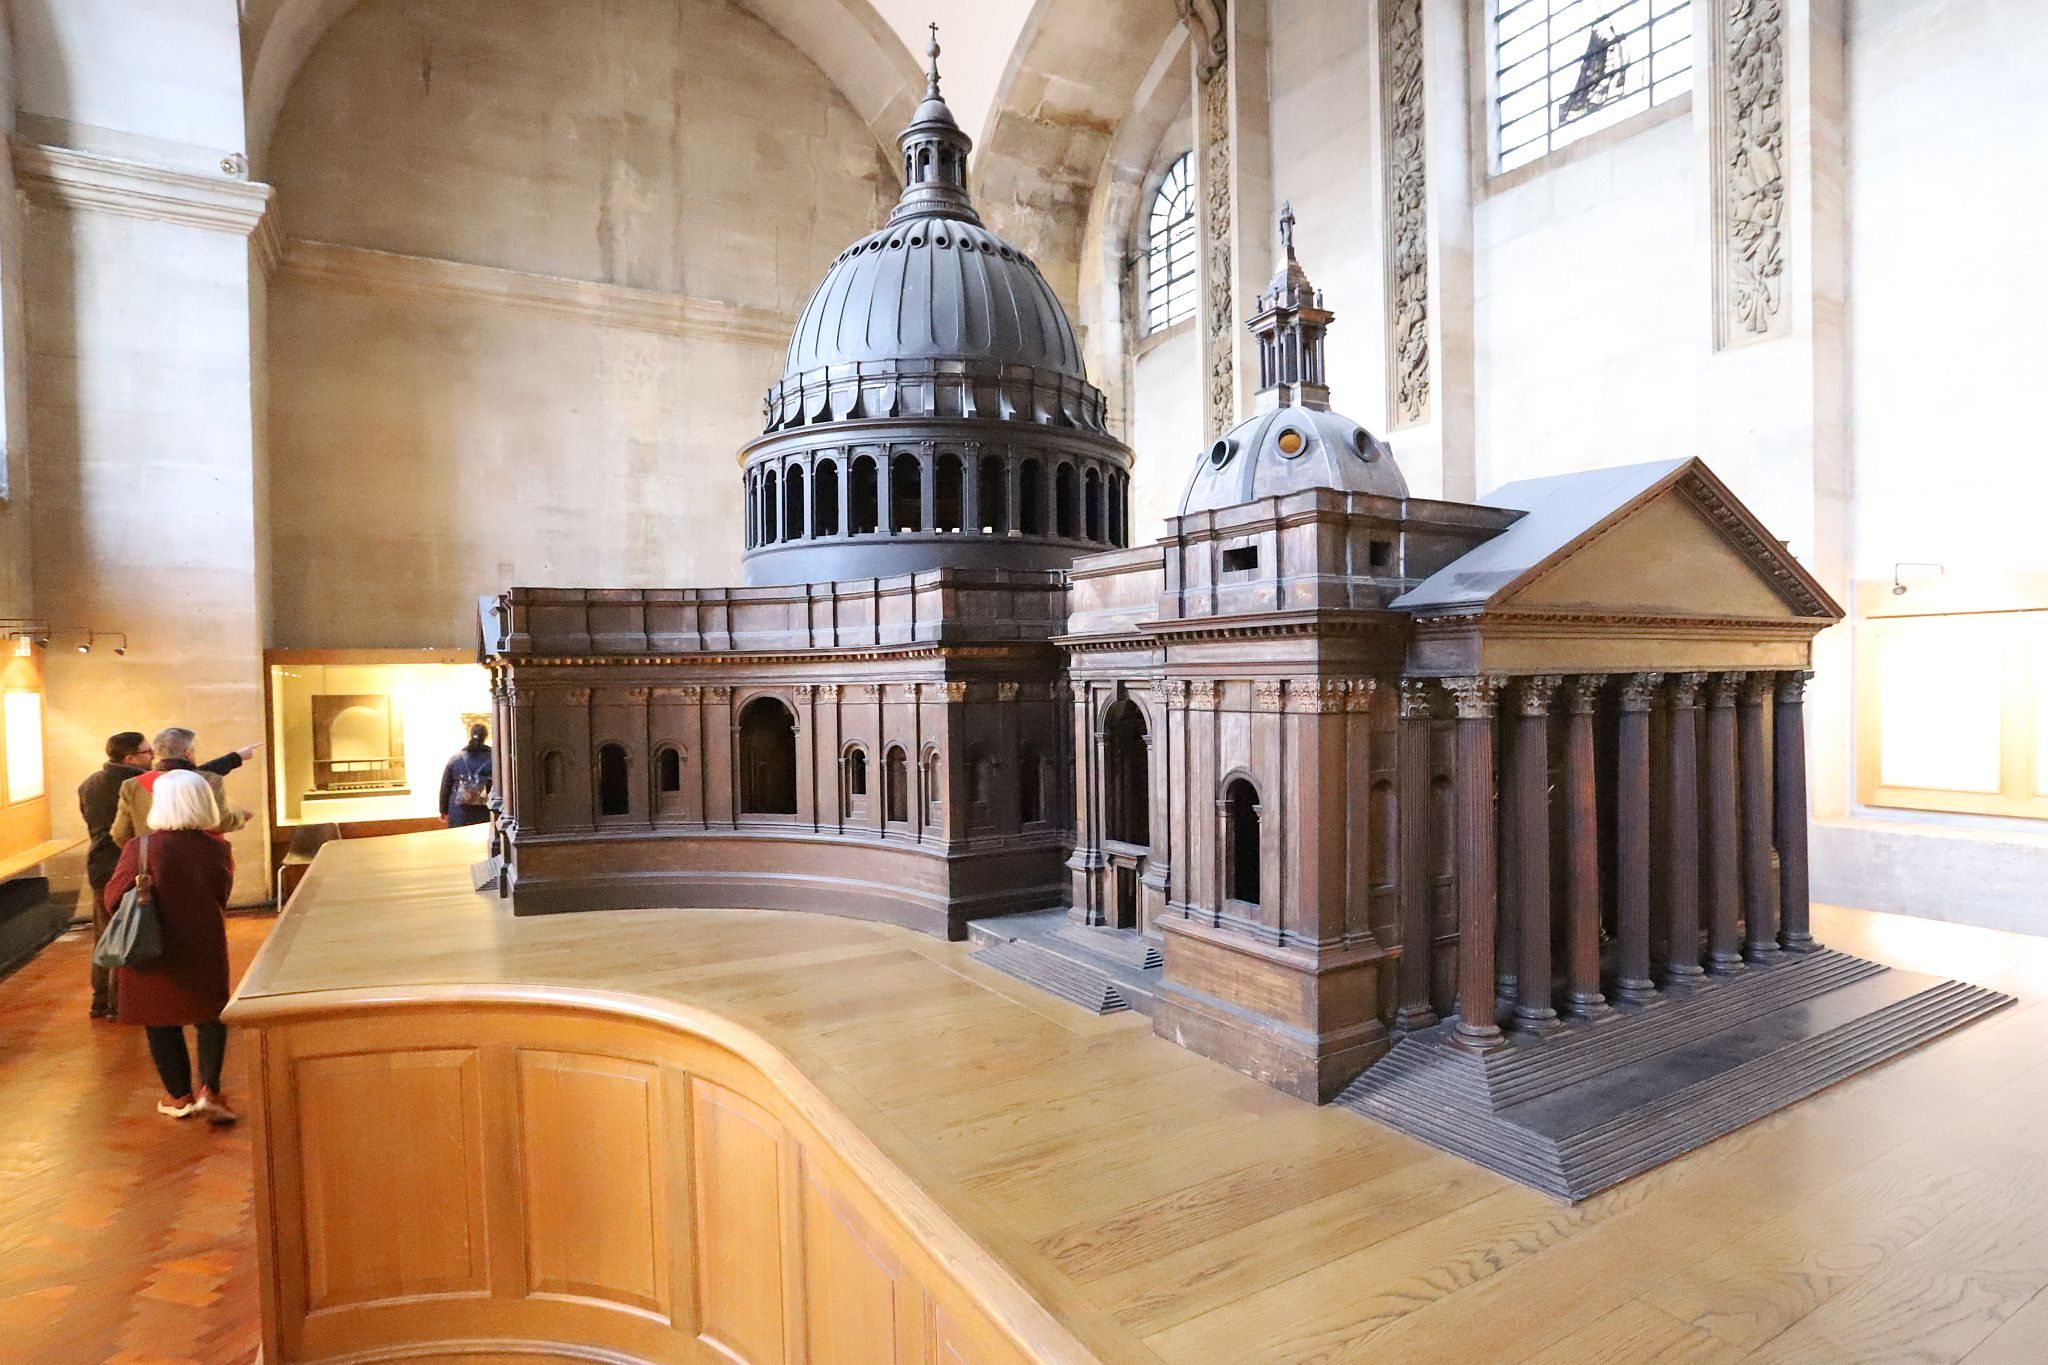 The Great Model of a proposed design for St. Paul's Cathedral. St. Paul's Cathedral Triforium Tour, 09-Jan-2023.